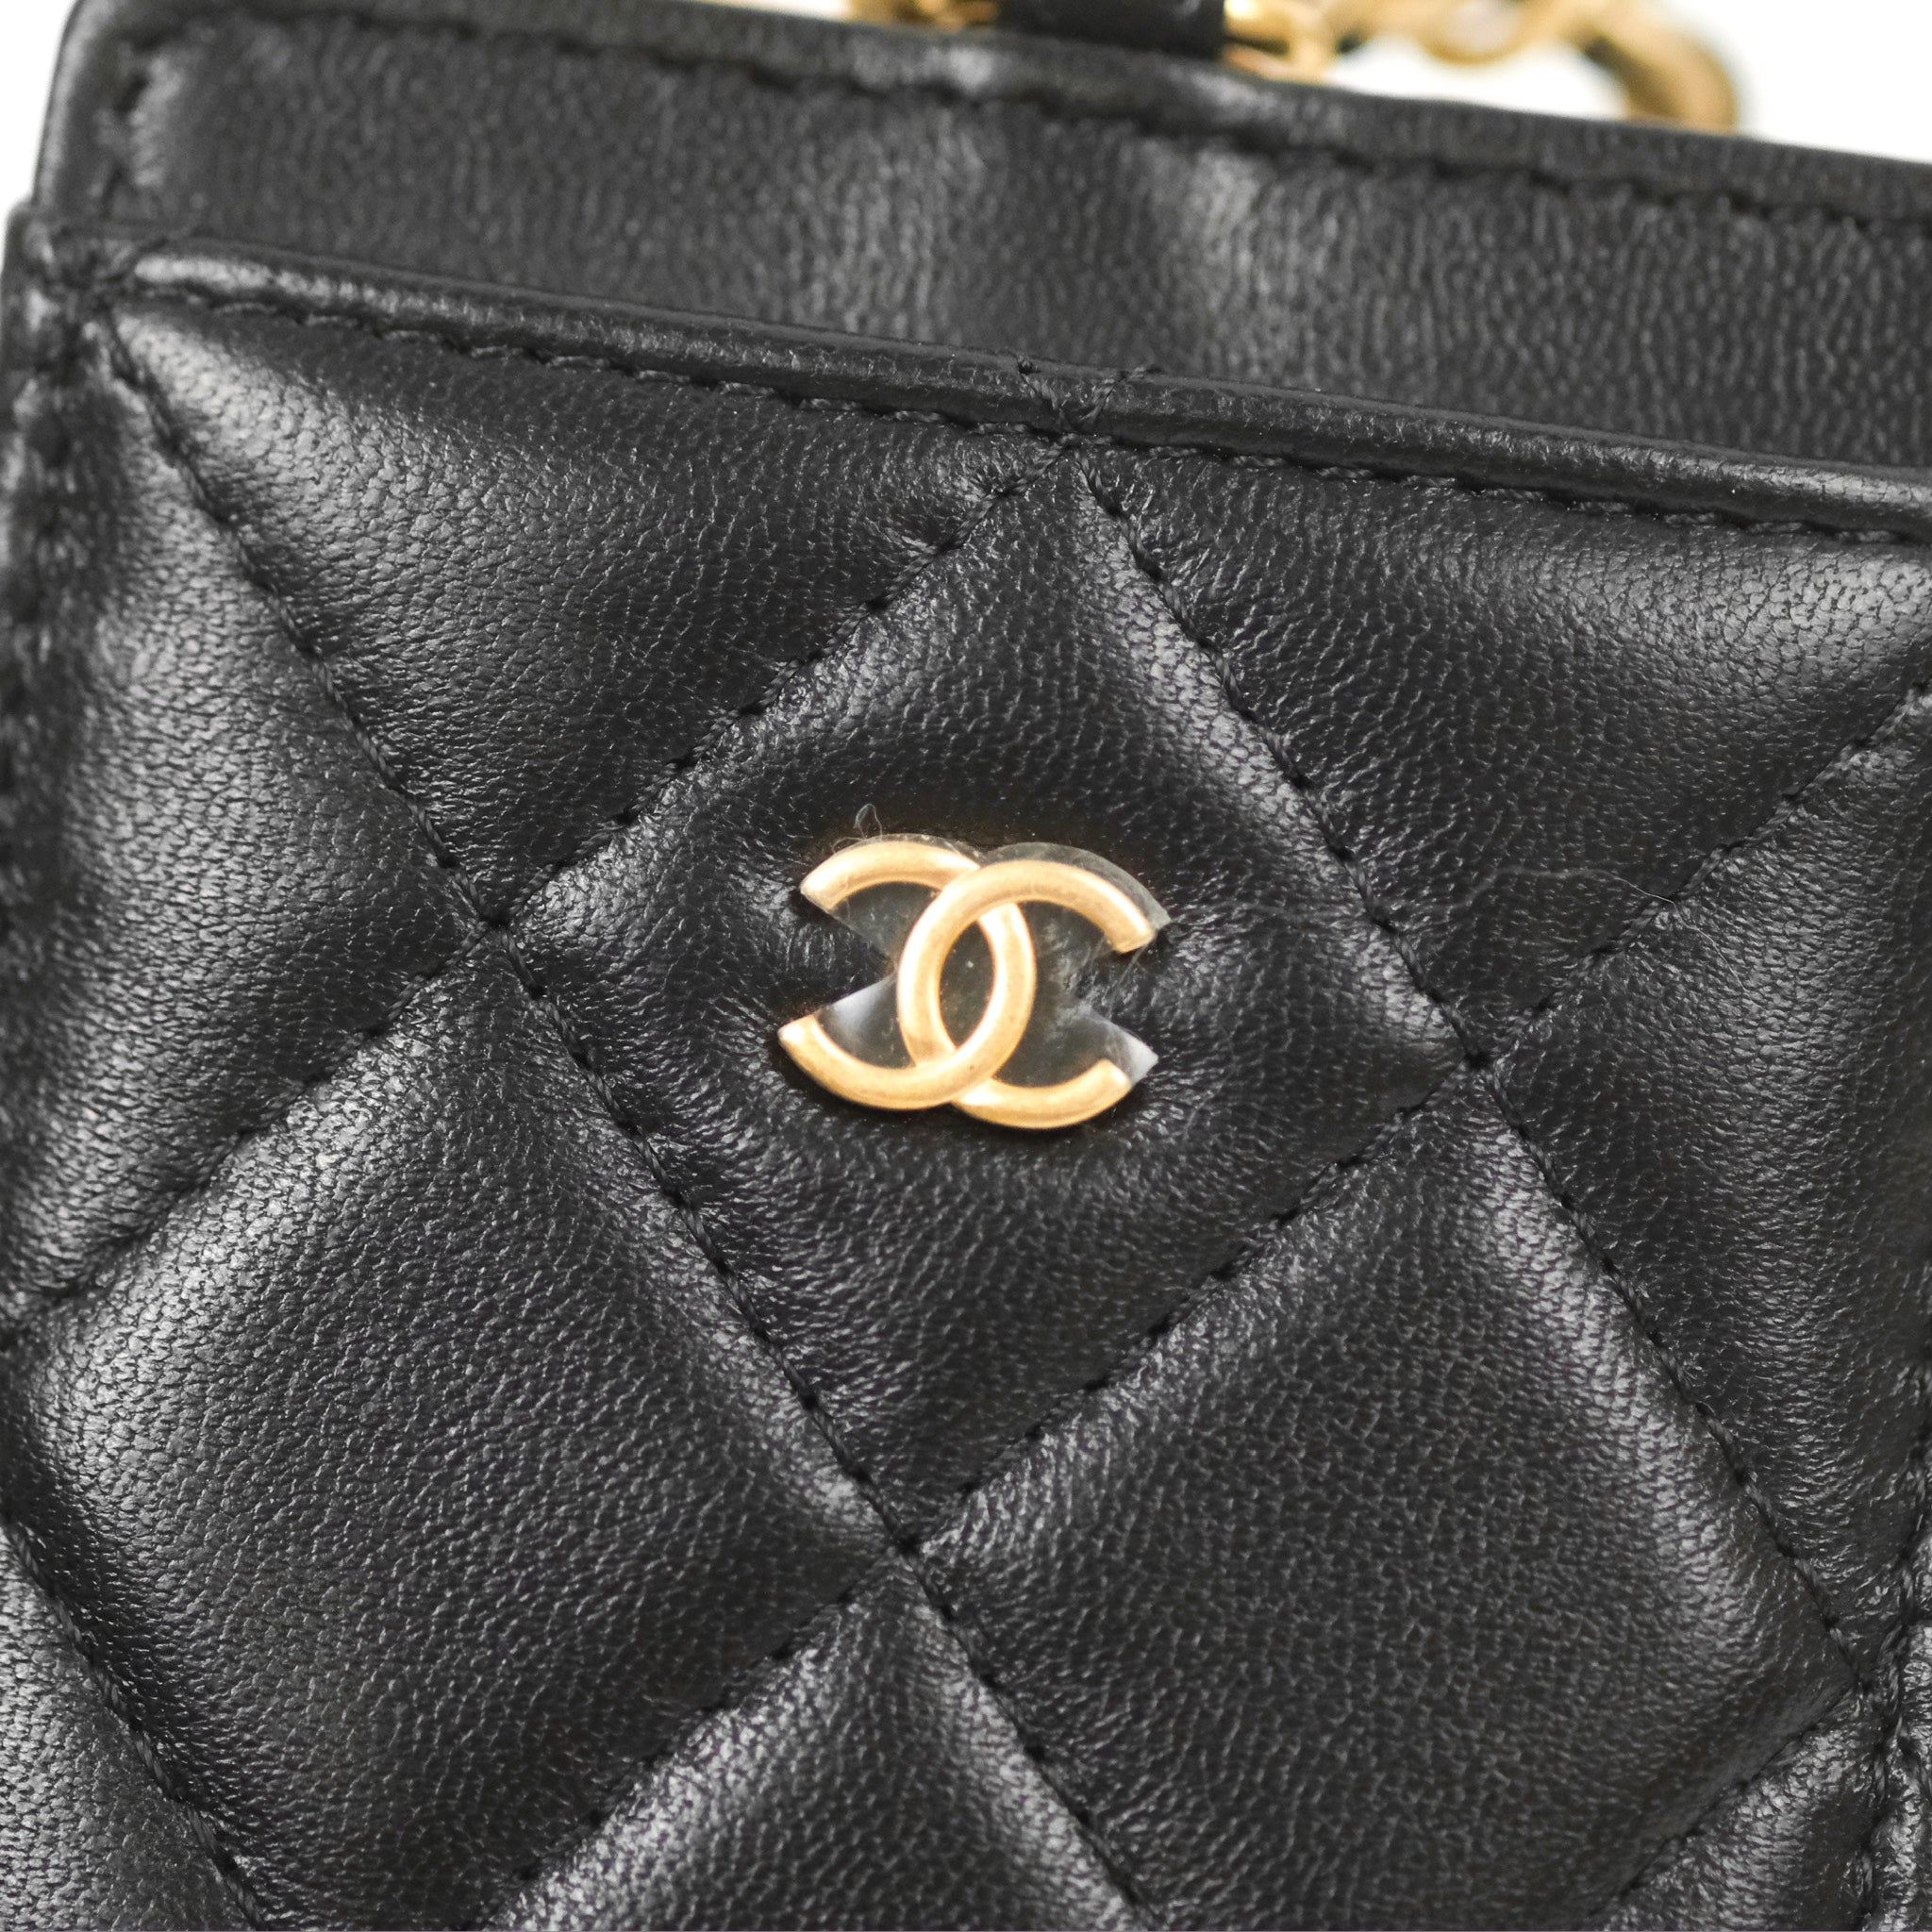 CHANEL, Bags, Authentic Chanel Card Holder